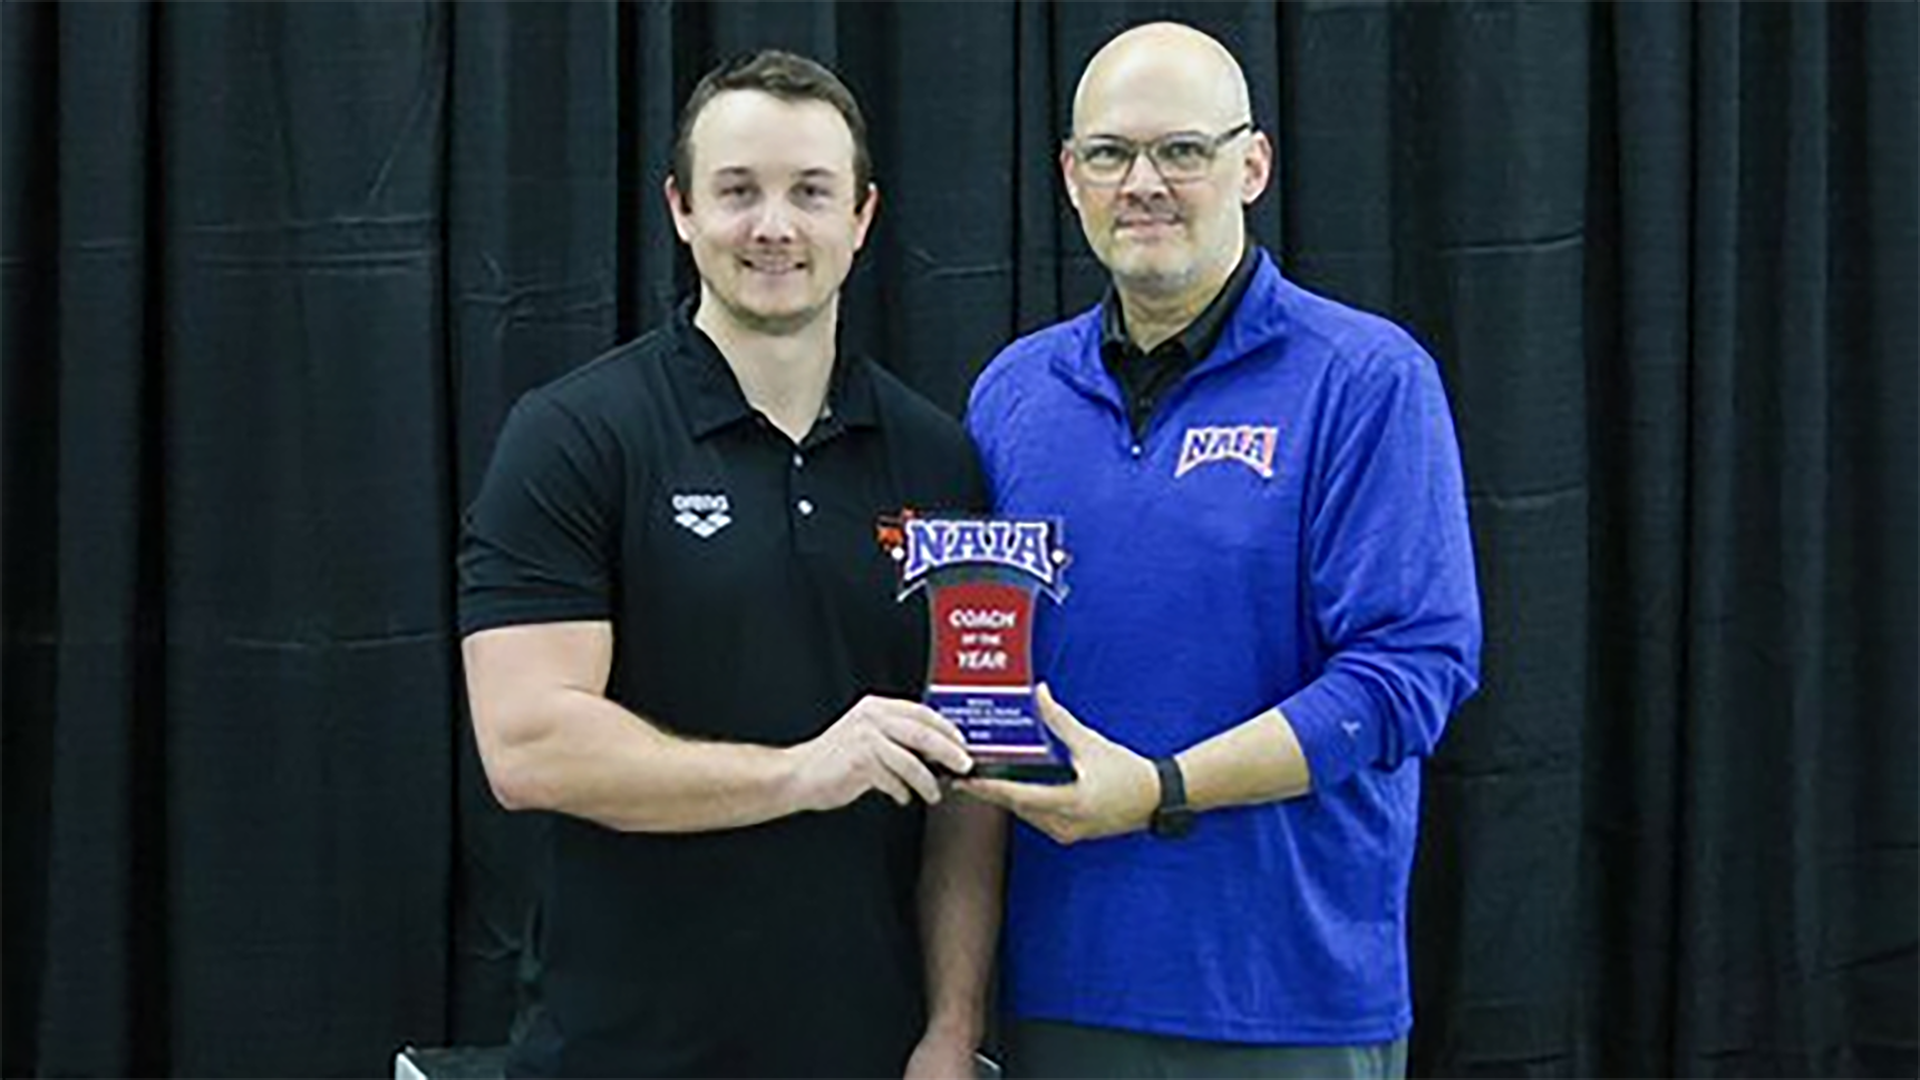 Milligan Places Fourth at Nationals; Scarth Named NAIA Coach of the Year